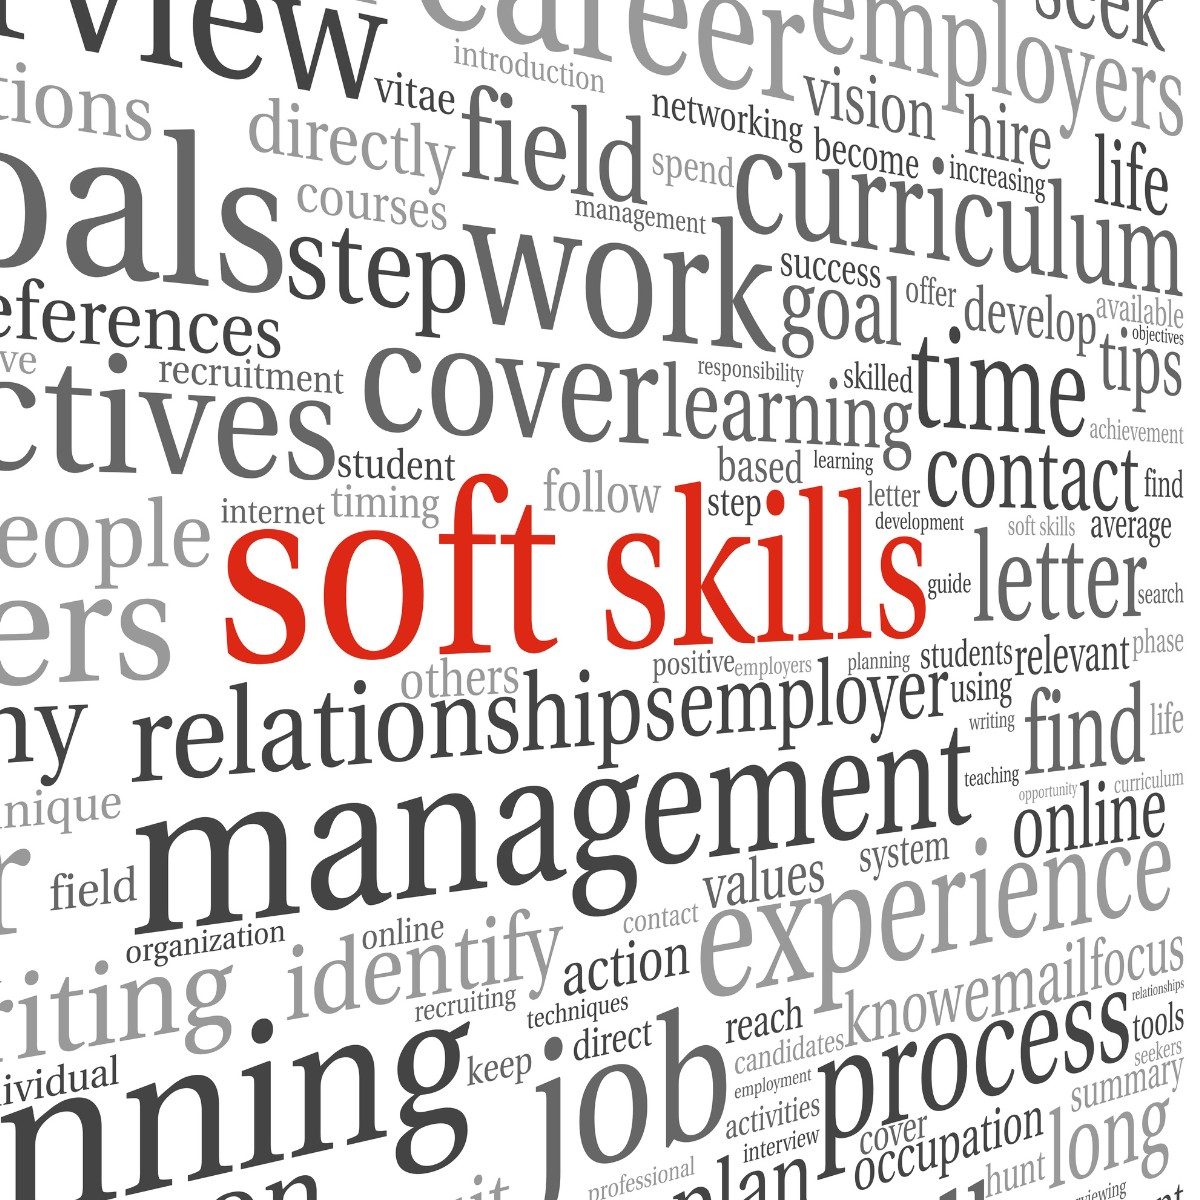 Hire for soft skills, not for technical skills 